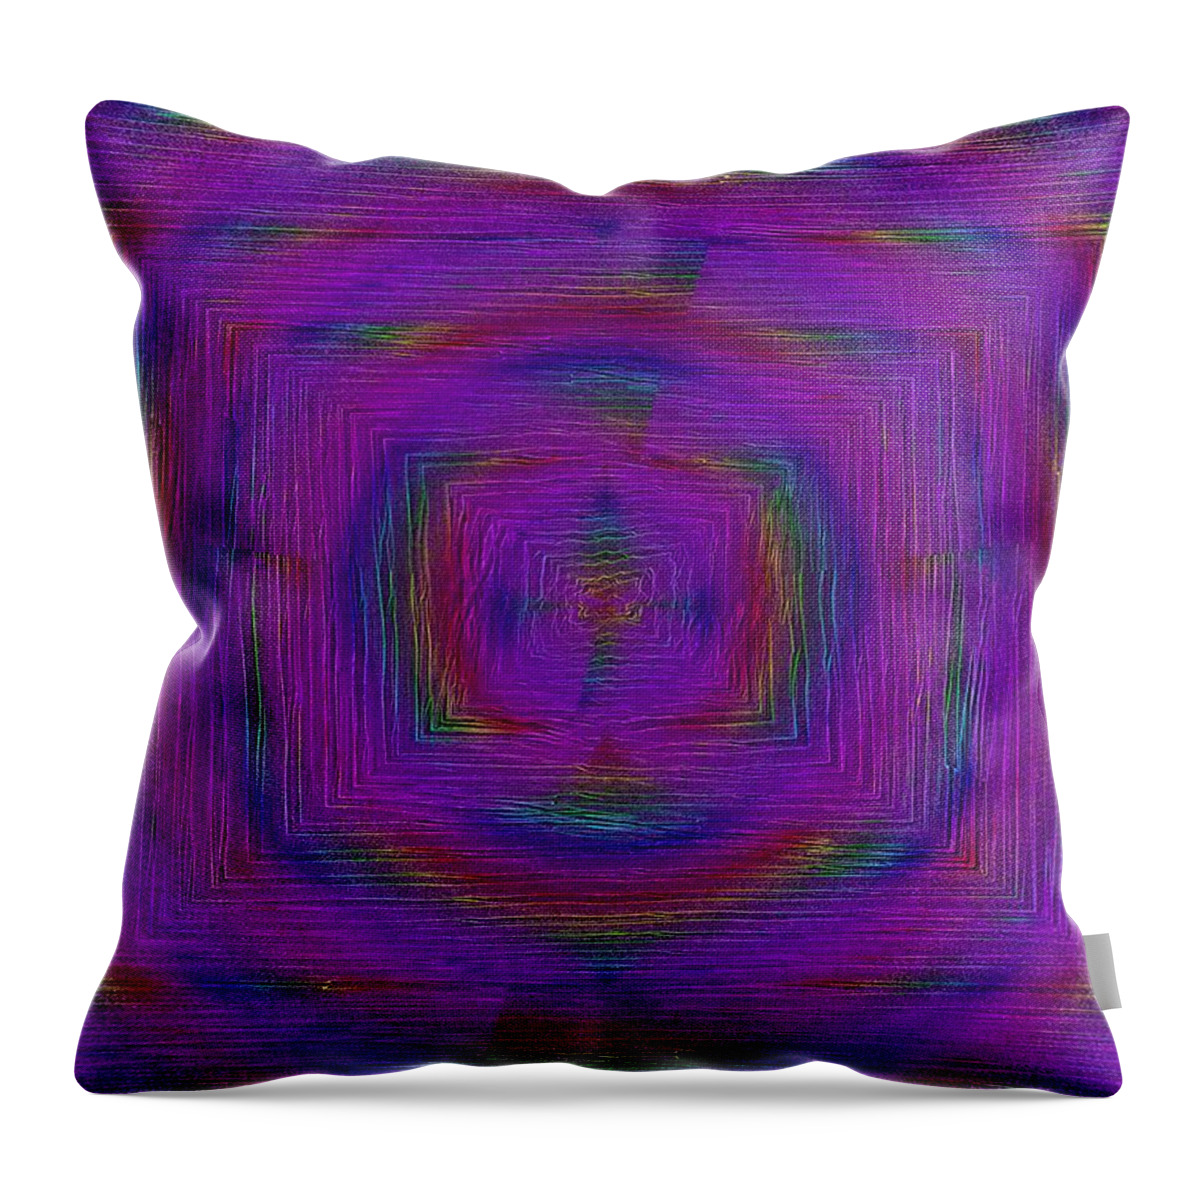 Ripples Throw Pillow featuring the digital art Ripples In Time by Tim Allen